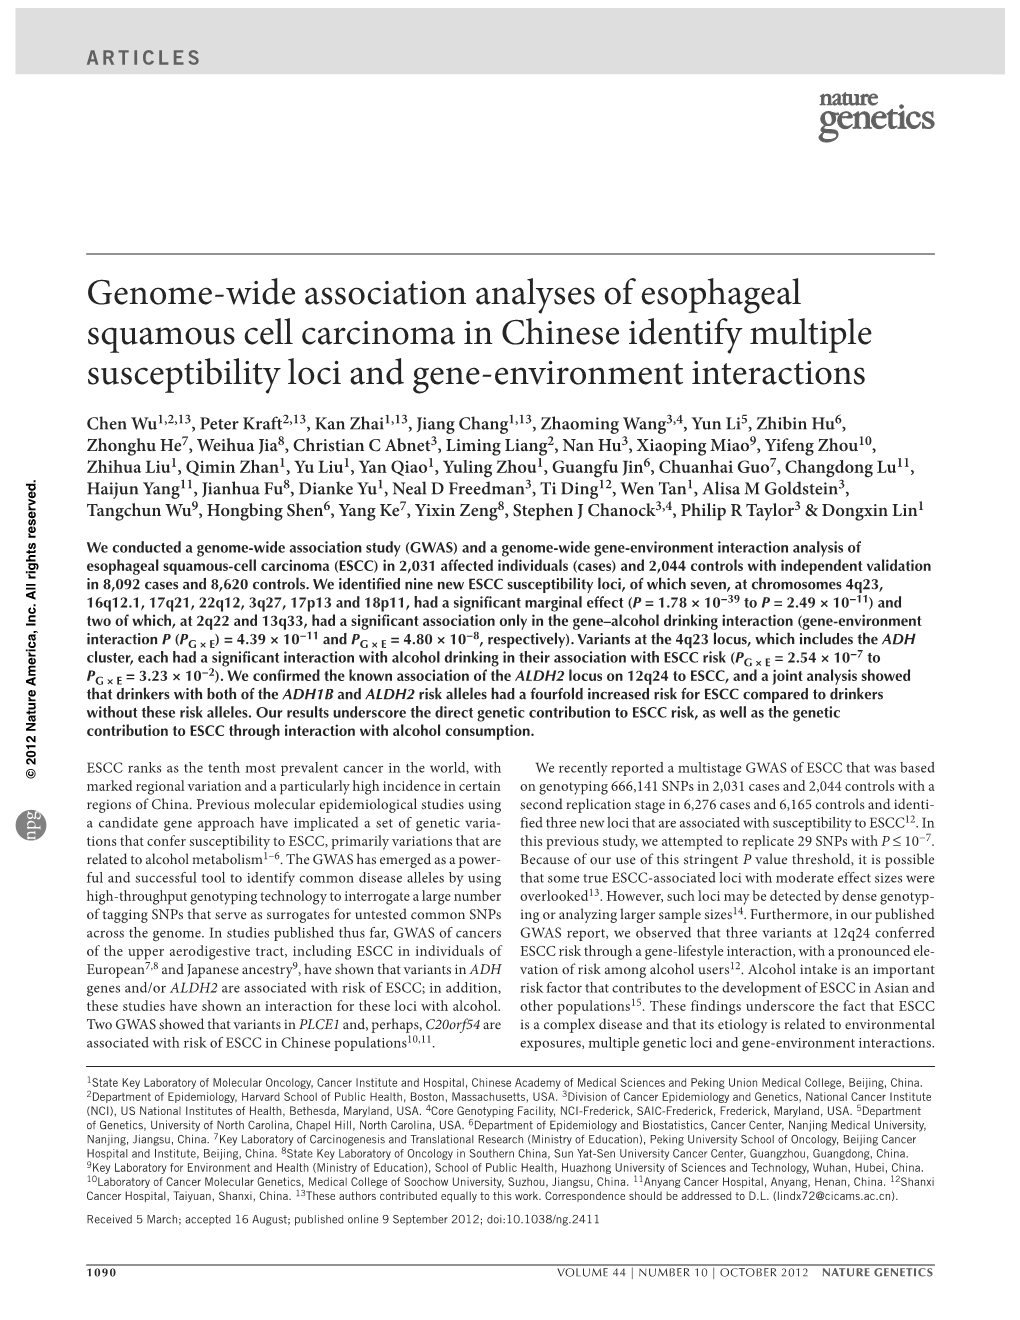 Genome-Wide Association Analyses of Esophageal Squamous Cell Carcinoma in Chinese Identify Multiple Susceptibility Loci and Gene-Environment Interactions